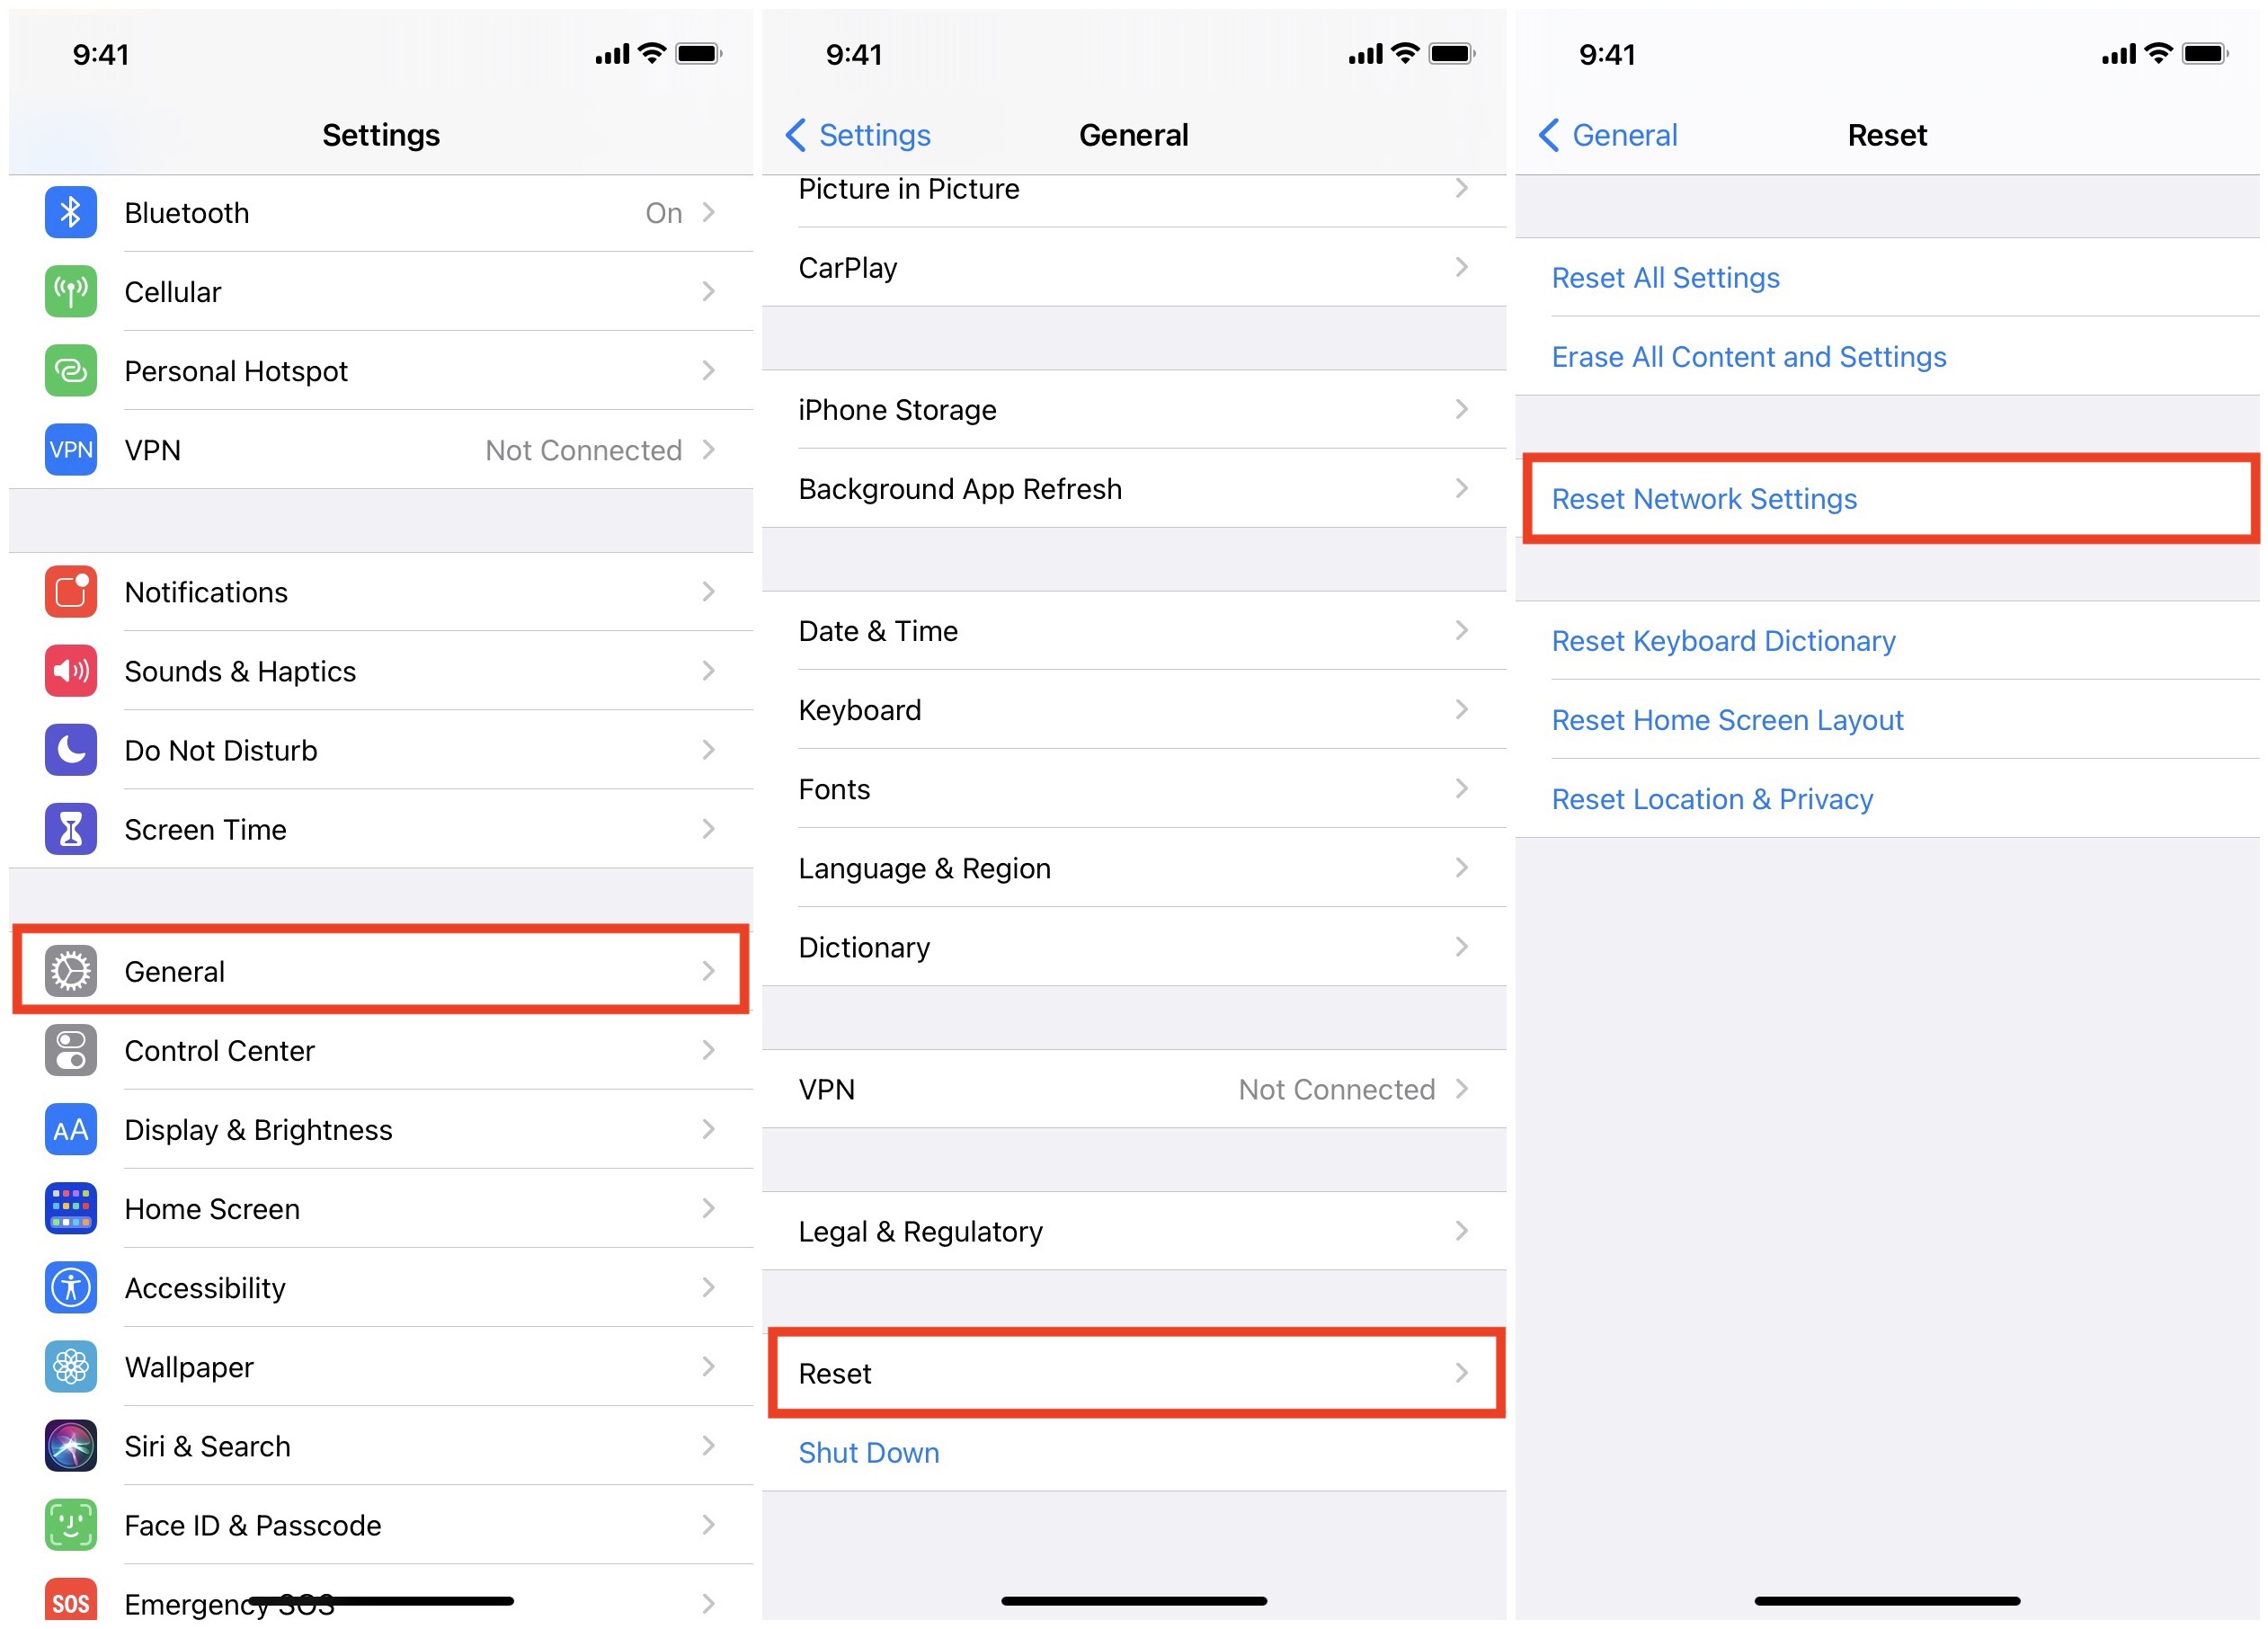 Reset Network Settings on iPhone